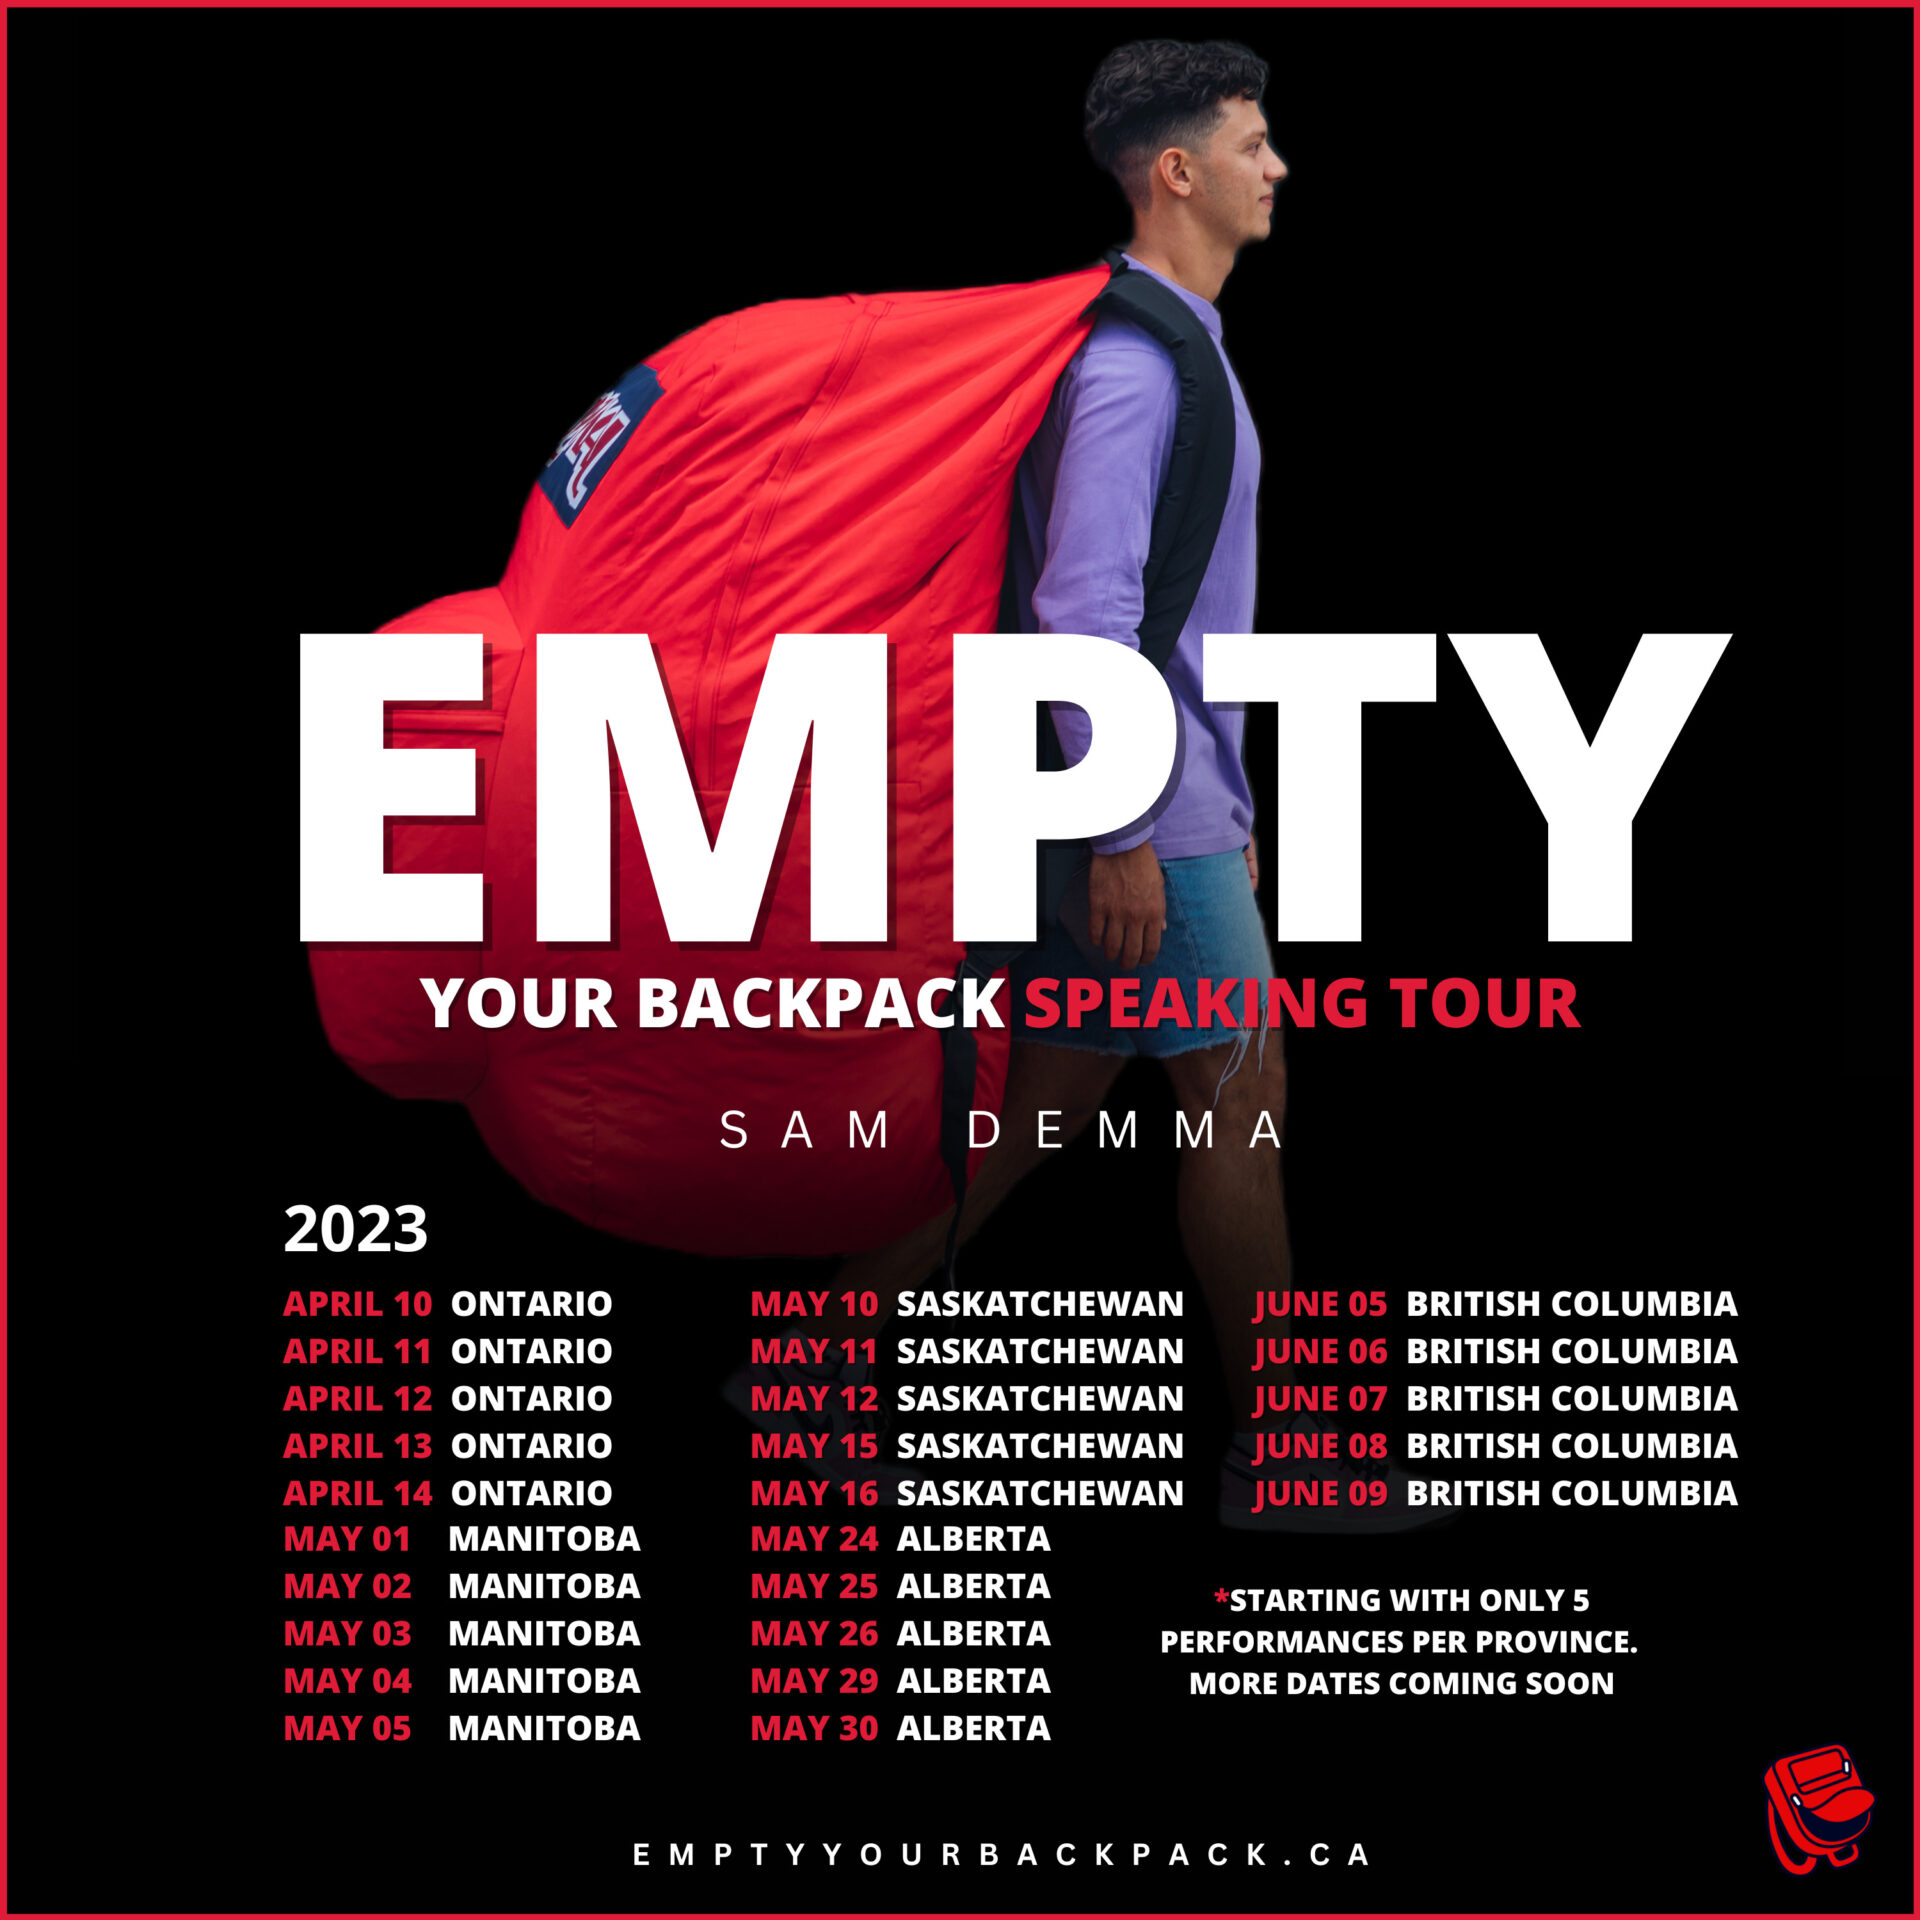 Empty Your Backpack Speaking Tour Dates